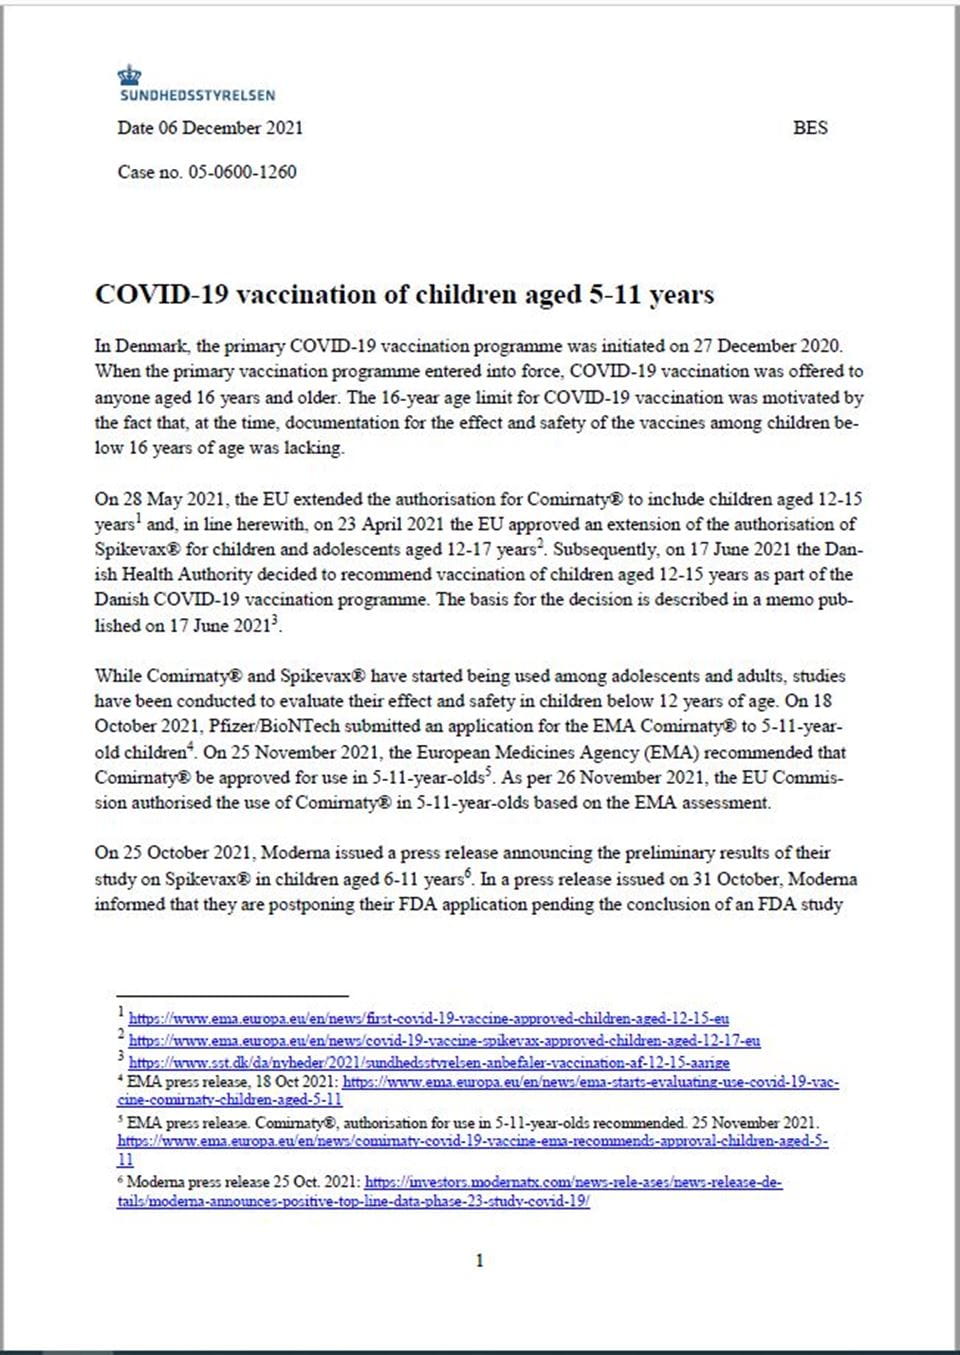 COVID-19 vaccination of children aged 5-11 years